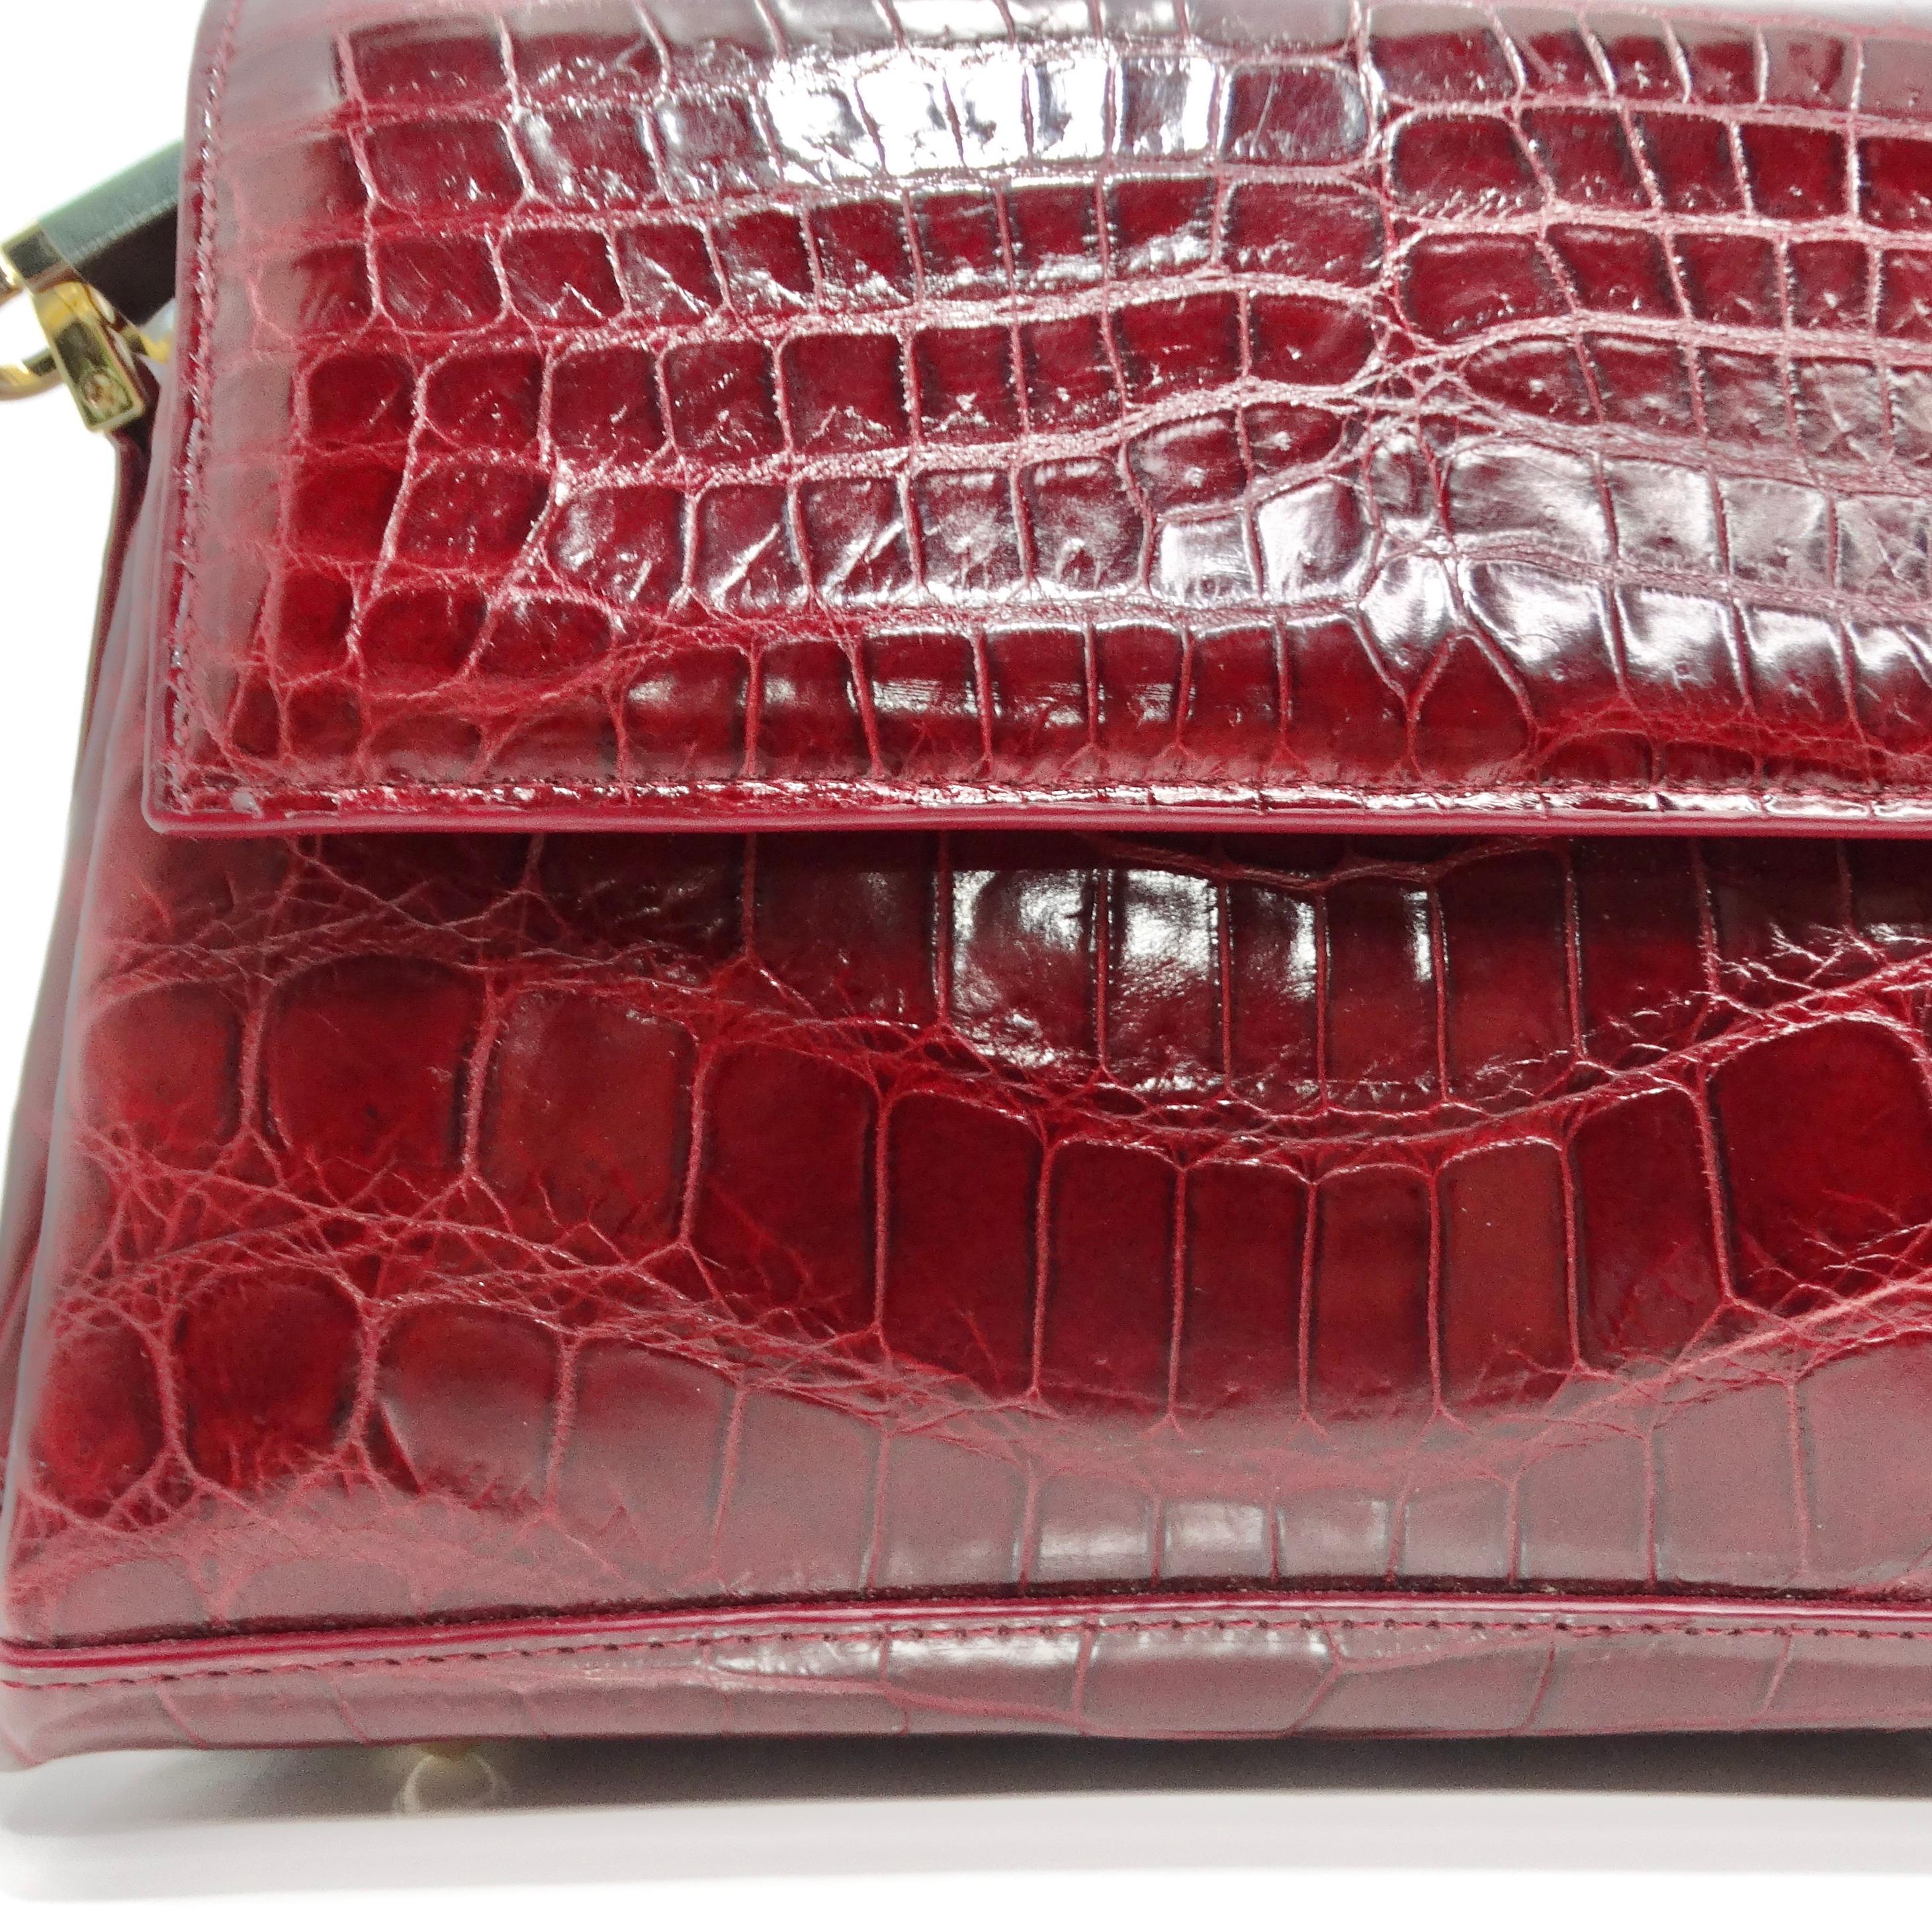 The BC Luxury Red Crocodile Leather Structured Handbag is a stunning accessory that exudes sophistication and elegance. Crafted from luxurious burgundy red crocodile leather, this structured mini handbag is sure to make a statement with its vibrant